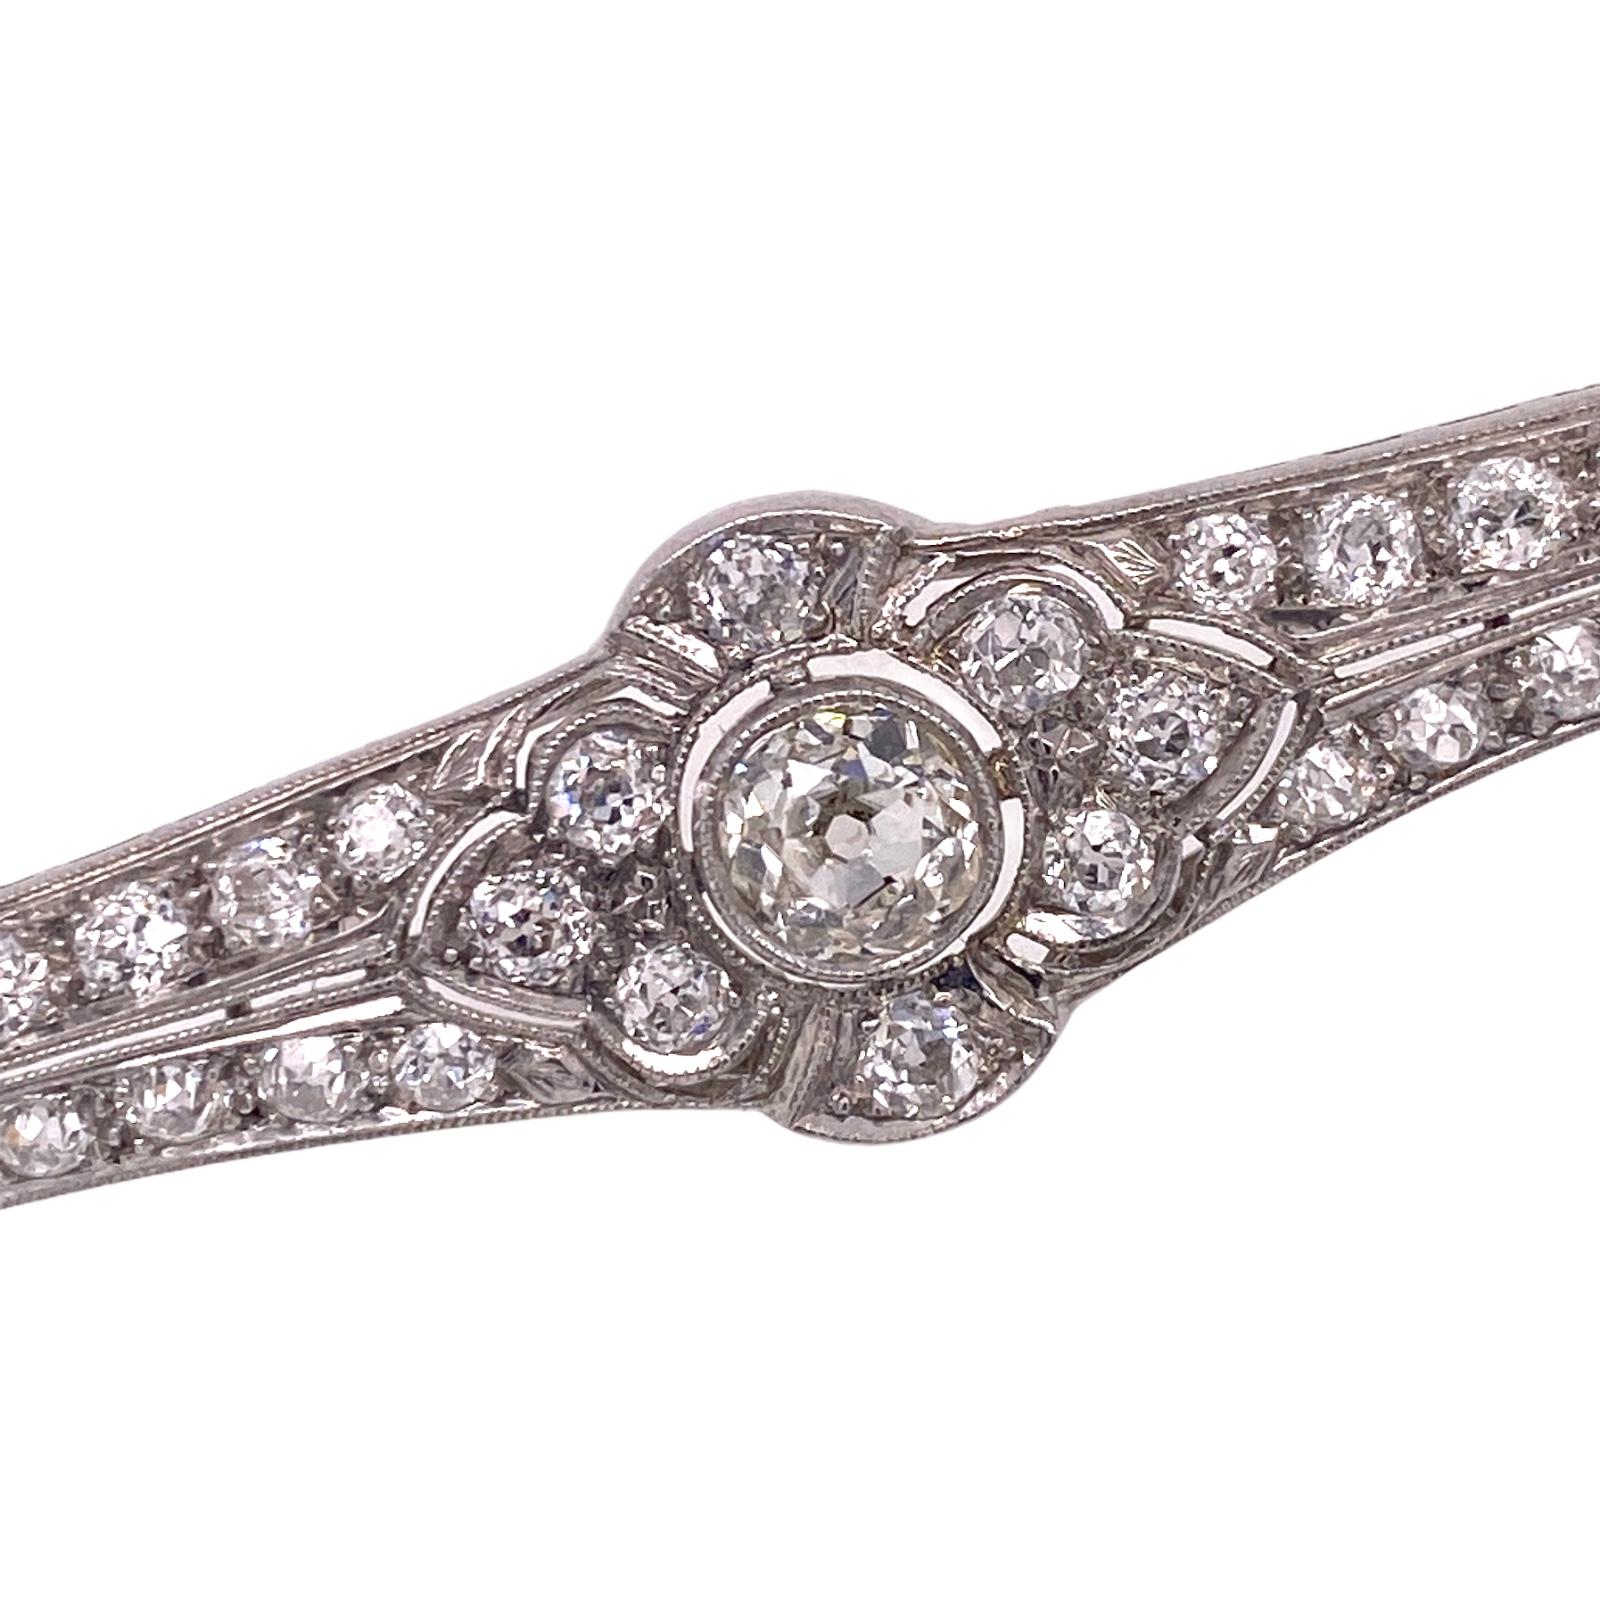 Original Art Deco Diamond brooch handcrafted in platinum. The brooch features a .54 carat Old European cut center diamond surrounded by another 36 Old European cut diamonds weighing a total of approximately 2.54 carat total weight. The diamonds are